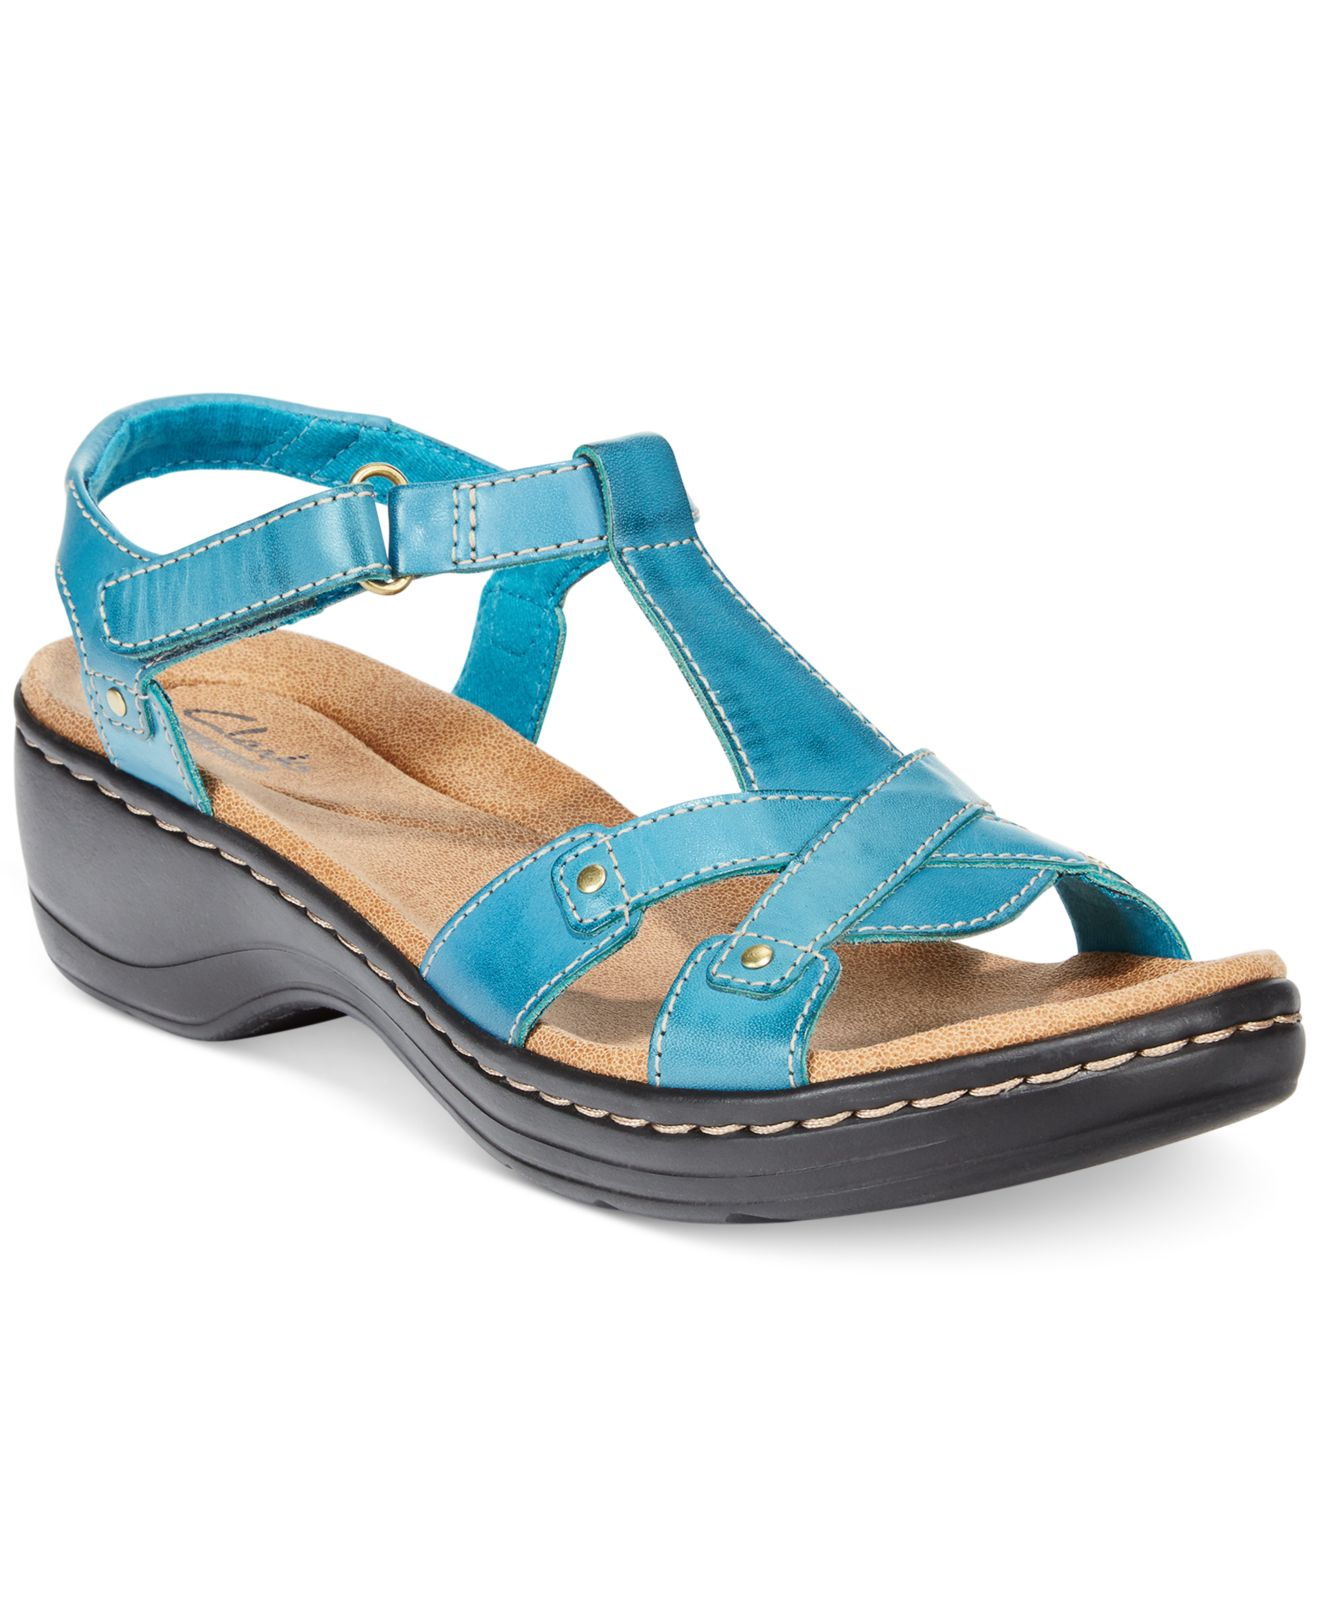 Clarks Collection Women'S Hayla Flute Flat Sandals in Blue | Lyst